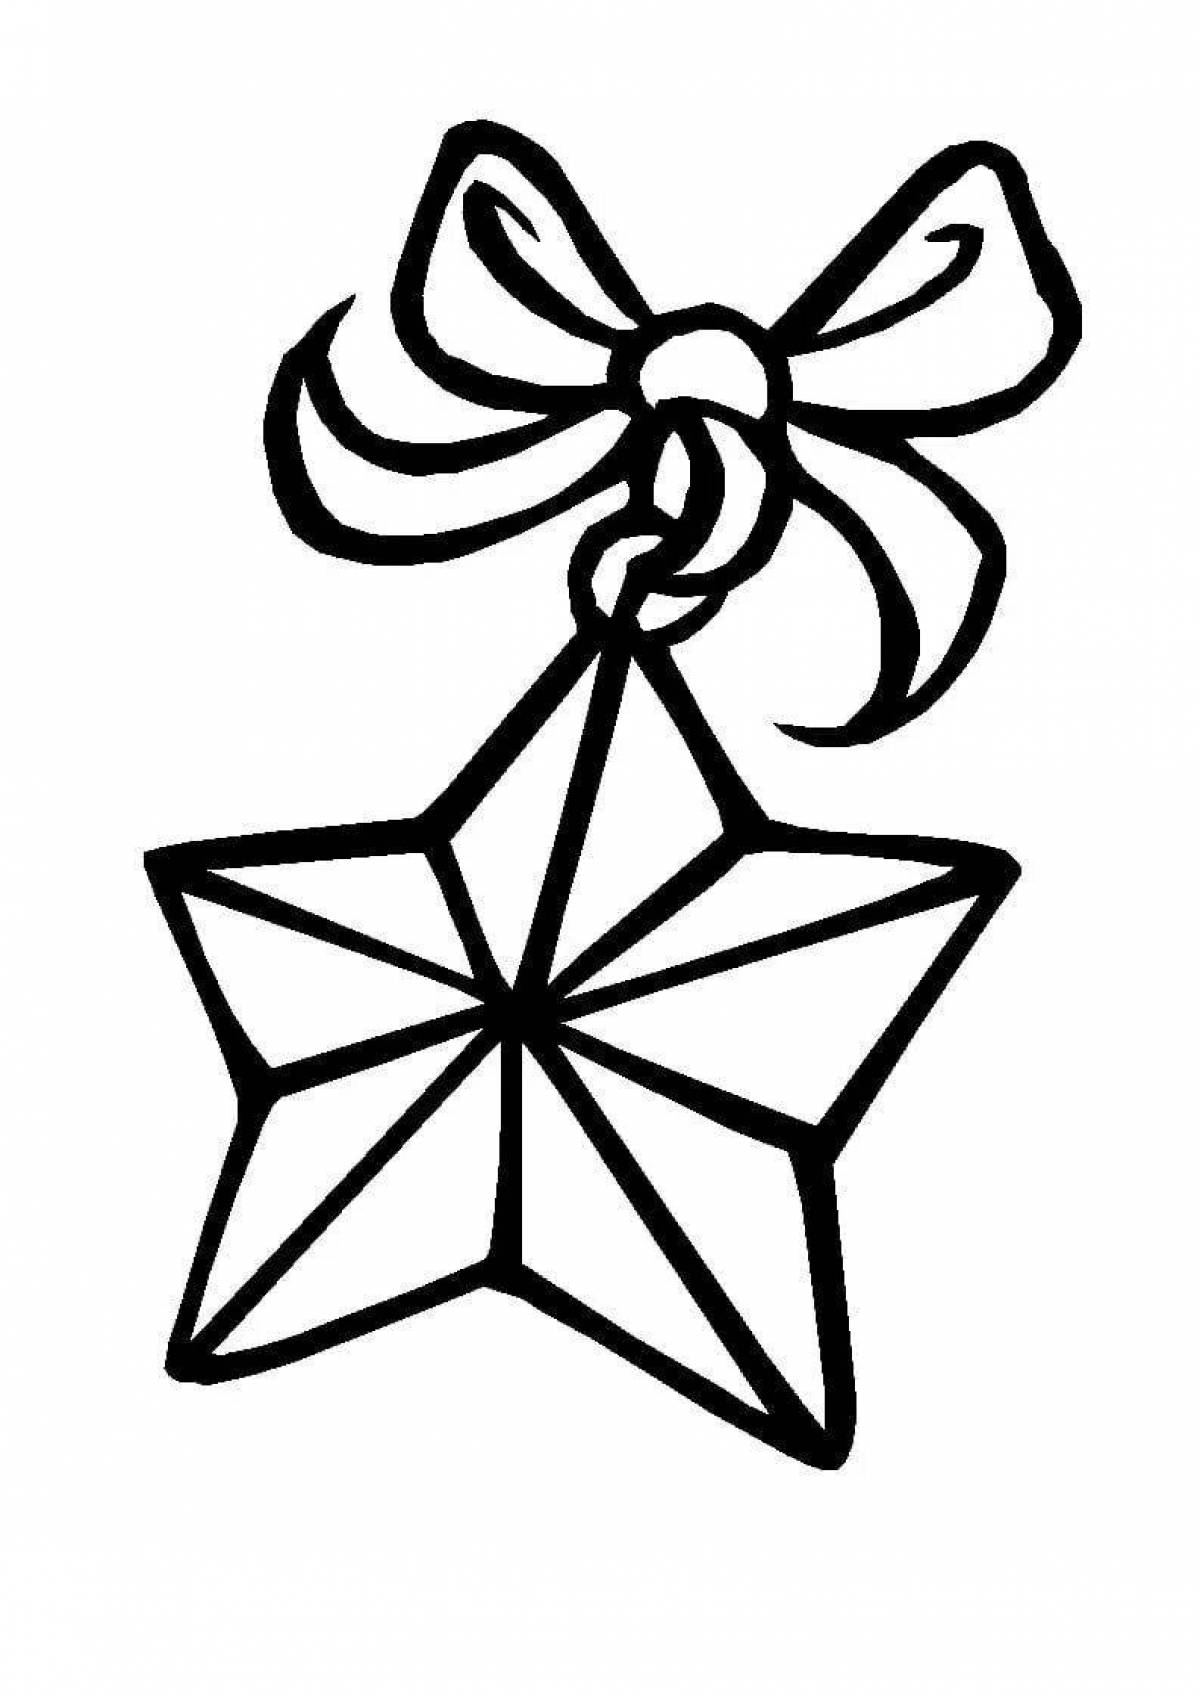 Glorious Christmas star coloring page